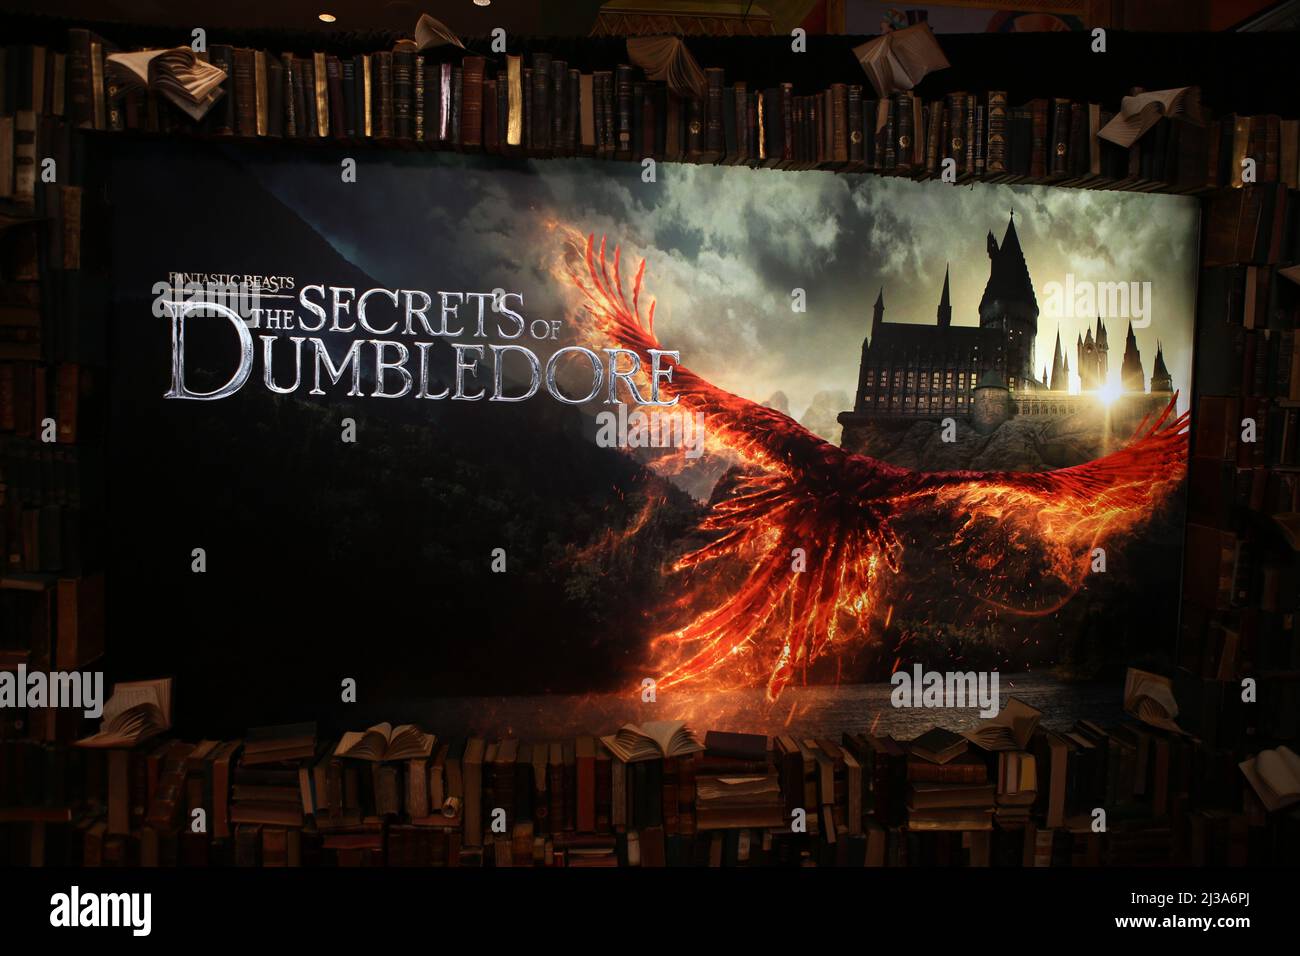 New York, Usa. 06. April 2022. Atmosphäre im The Fantastic Beasts The Secrets of Dumbledore - ein IMAX Exclusive Fantastic Event, das am AMC Lincoln Square in New York, NY, im April stattfindet. 6, 2022. (Foto von Udo Salters/Sipa USA) Quelle: SIPA USA/Alamy Live News Stockfoto